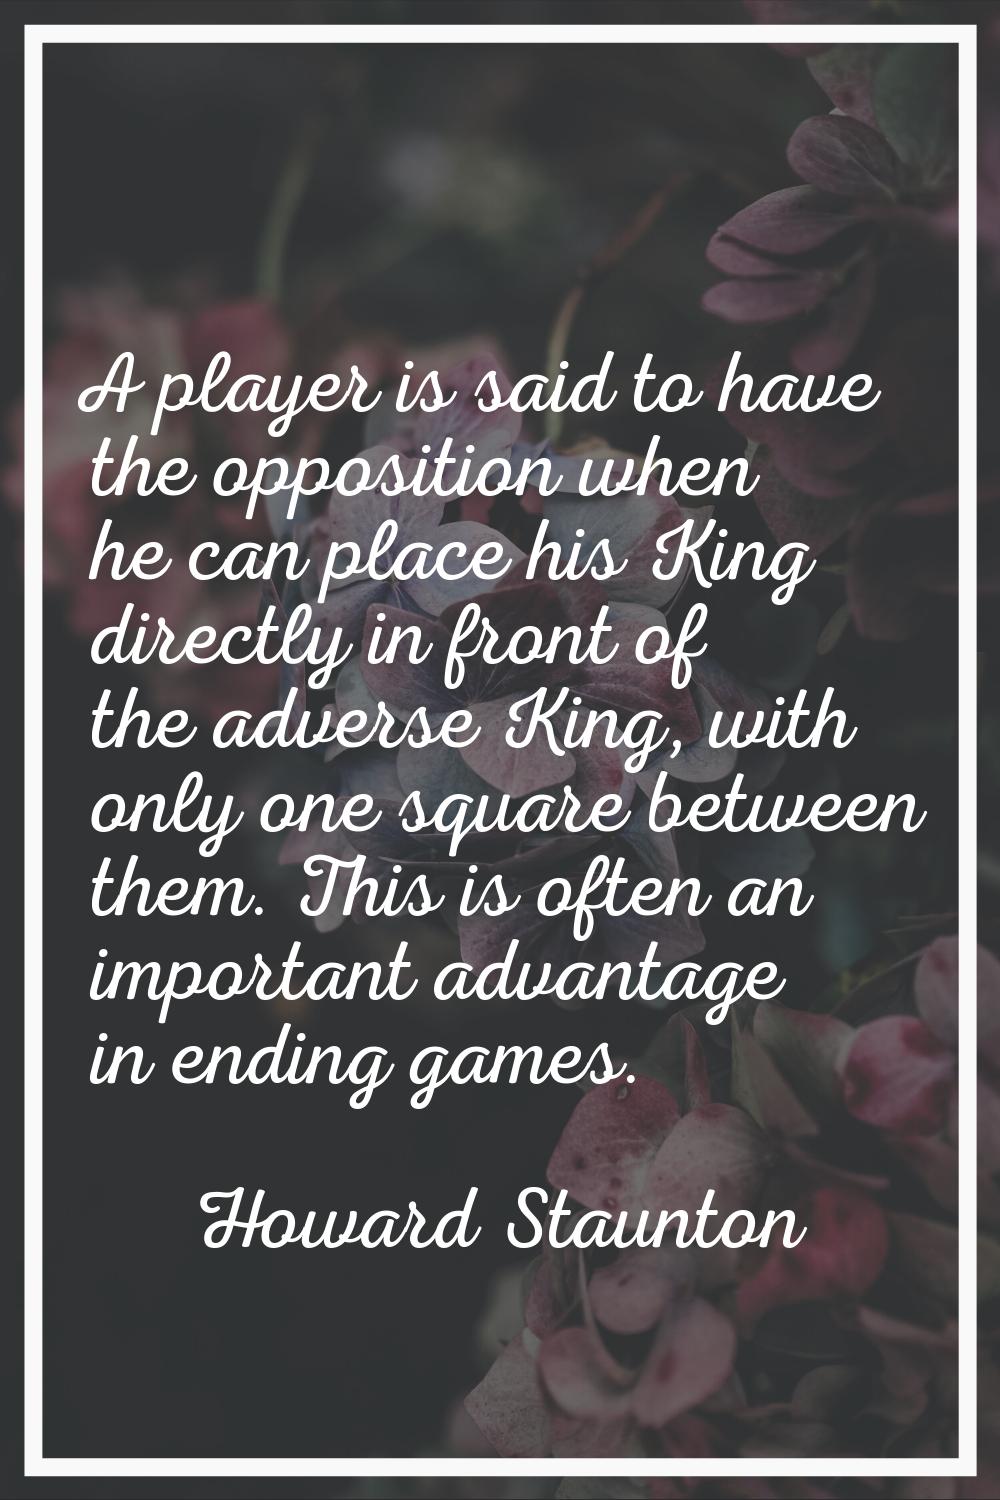 A player is said to have the opposition when he can place his King directly in front of the adverse